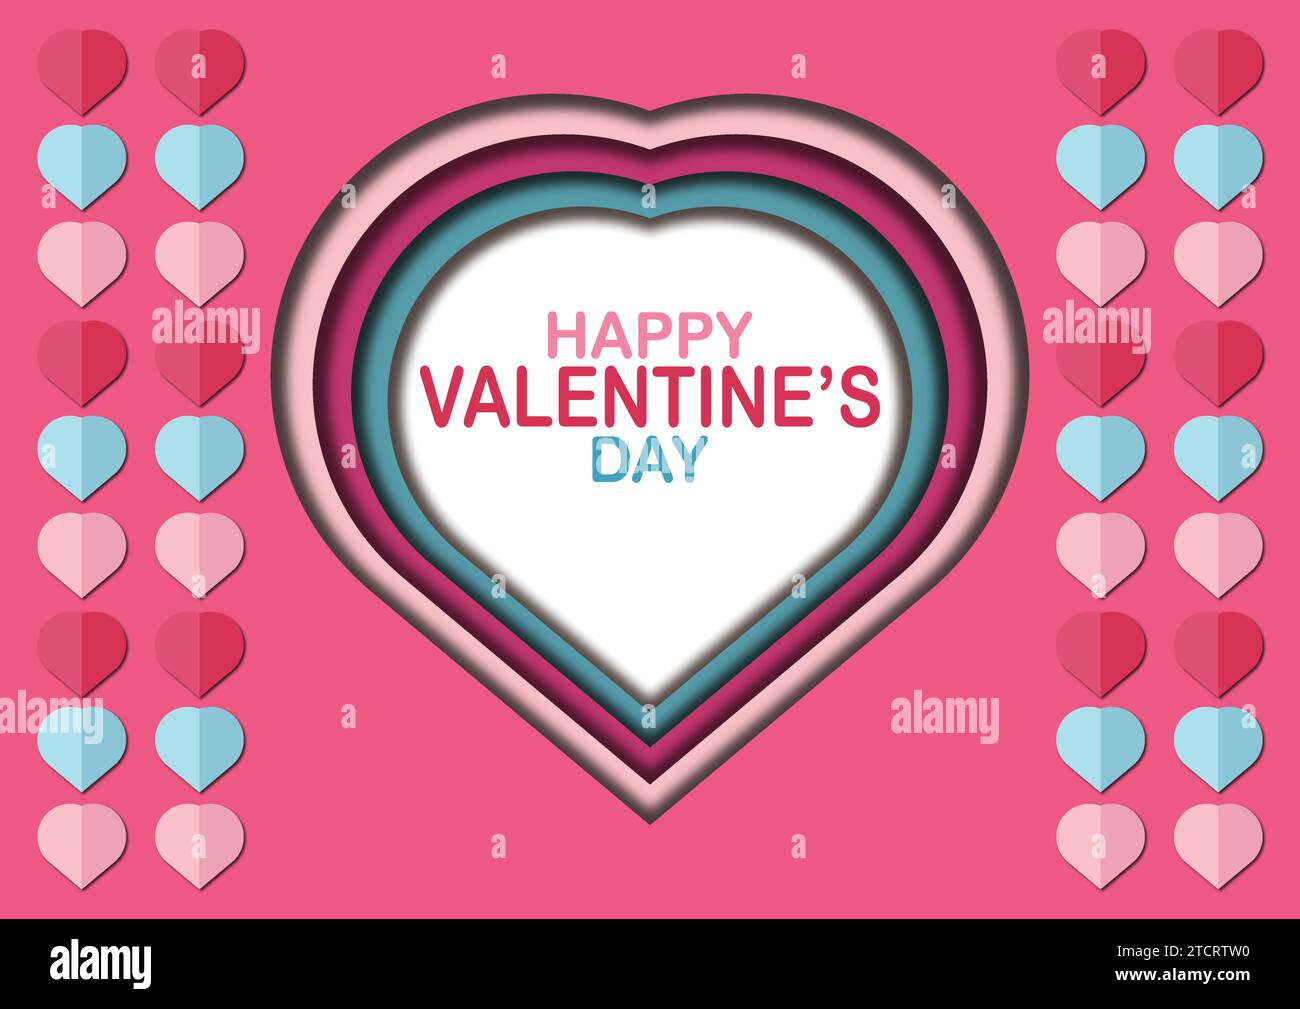 Happy Valentine's Day Greeting Card. Vector Illustration Stock Vector